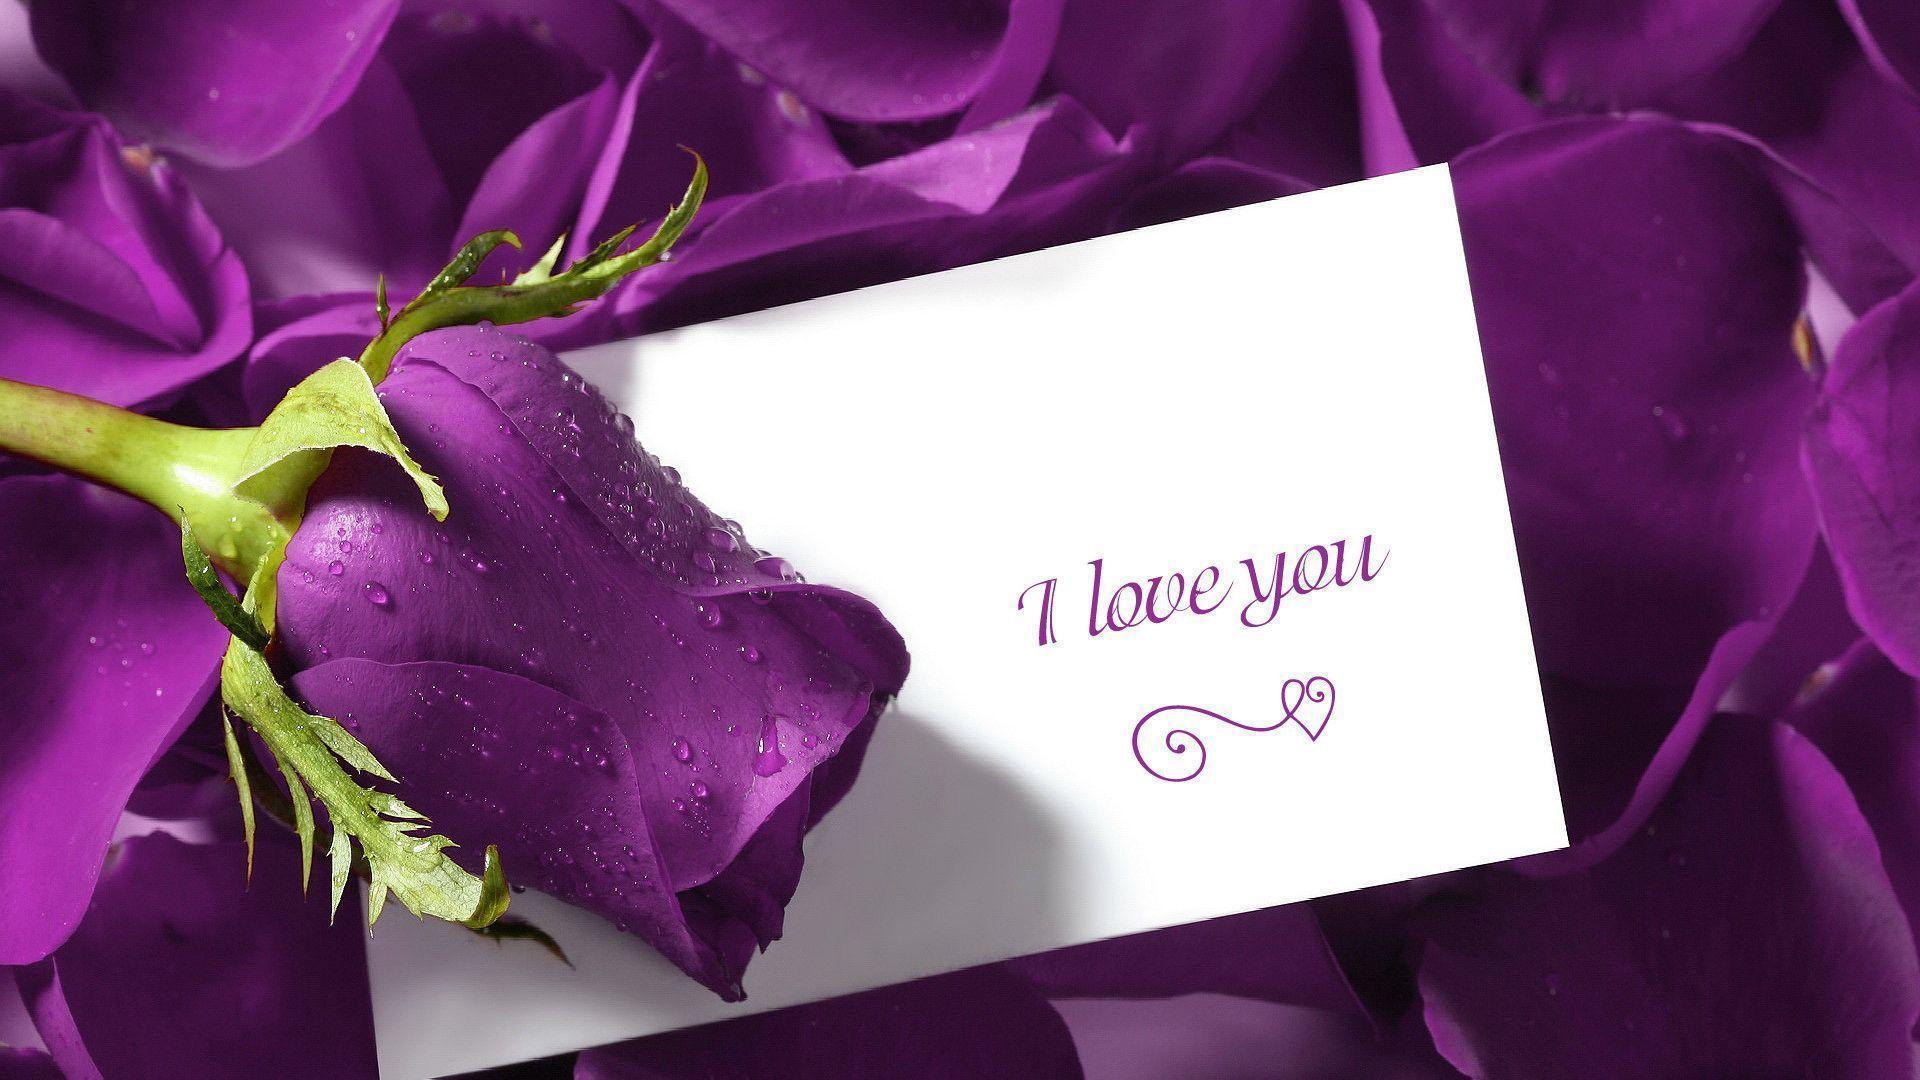 hd wallpaper cute love quotes. FREE 4U WALLPAPERS